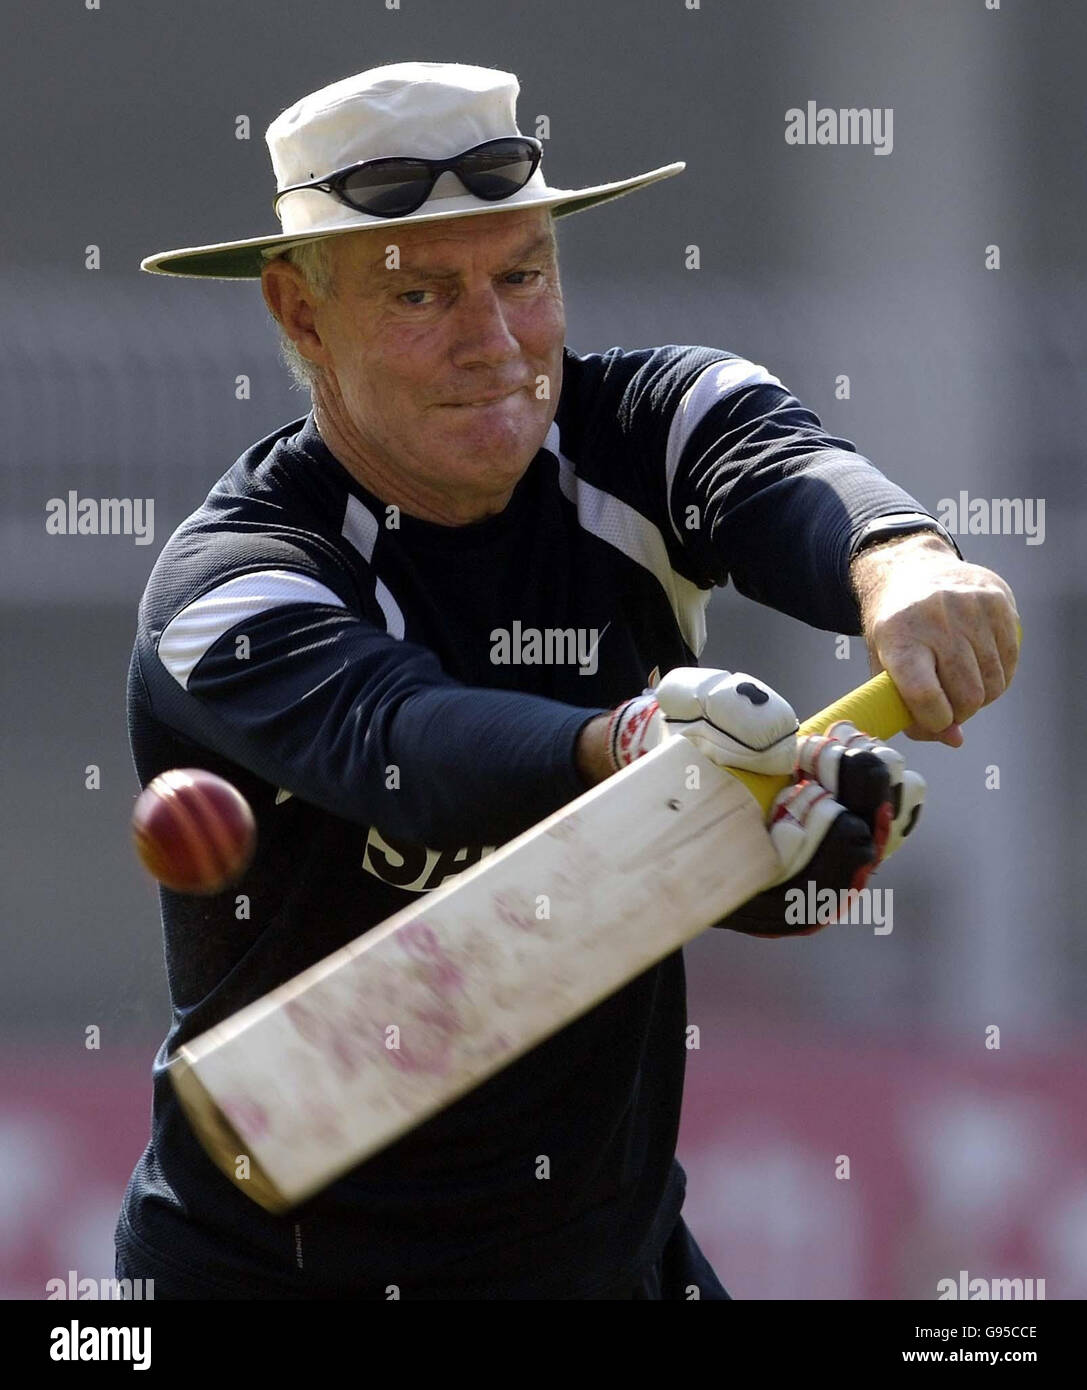 Indian coach Greg Chappell gives his players slip practice before the start of the fourth day of the first Test match at the Vidarbha Cricket Association ground, Nagpur, India, Saturday March 4, 2006. PRESS ASSOCIATION Photo. Photo credit should read: Rebecca Naden/PA. Stock Photo